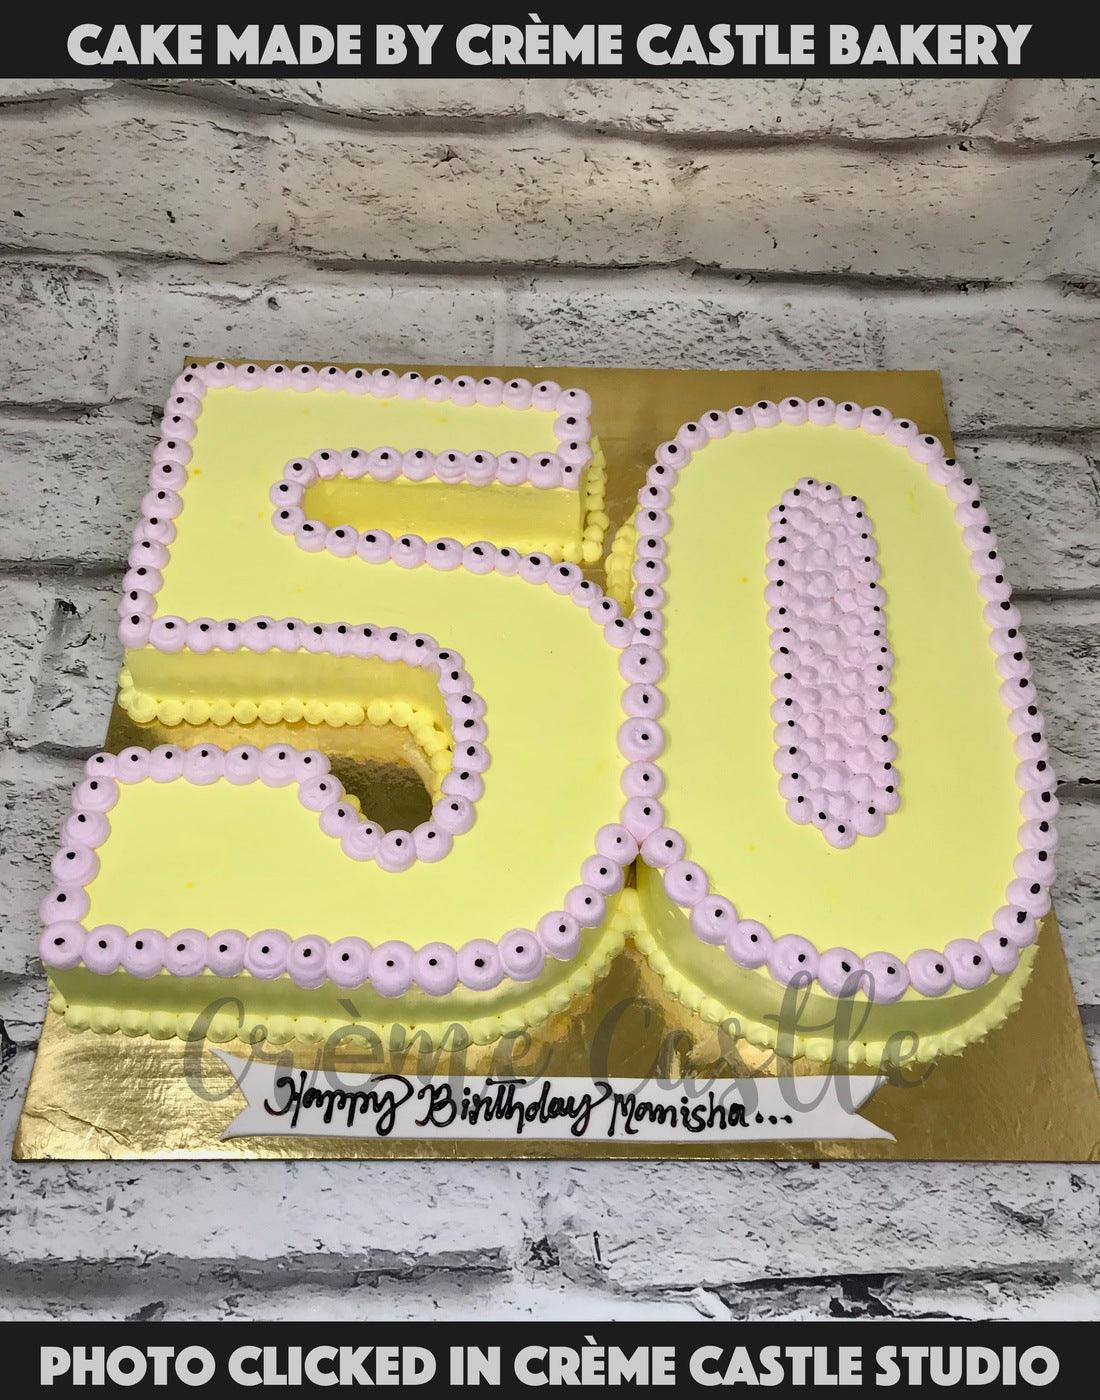 50th Birthday Cake in Shape by Creme Castle